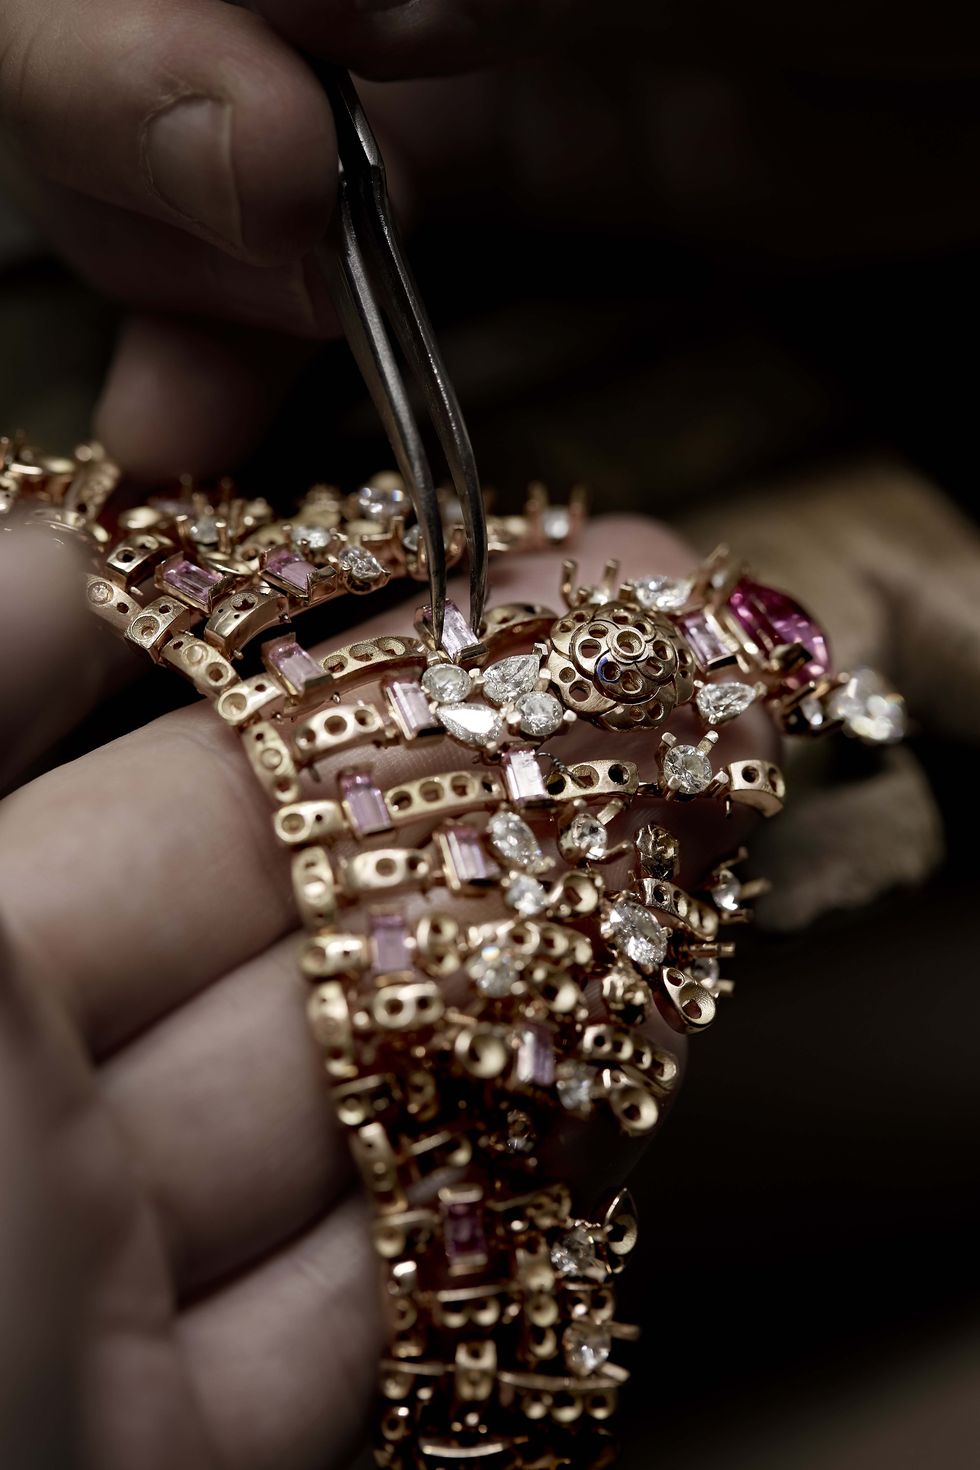 The charming story behind Chanel's high-jewellery collection